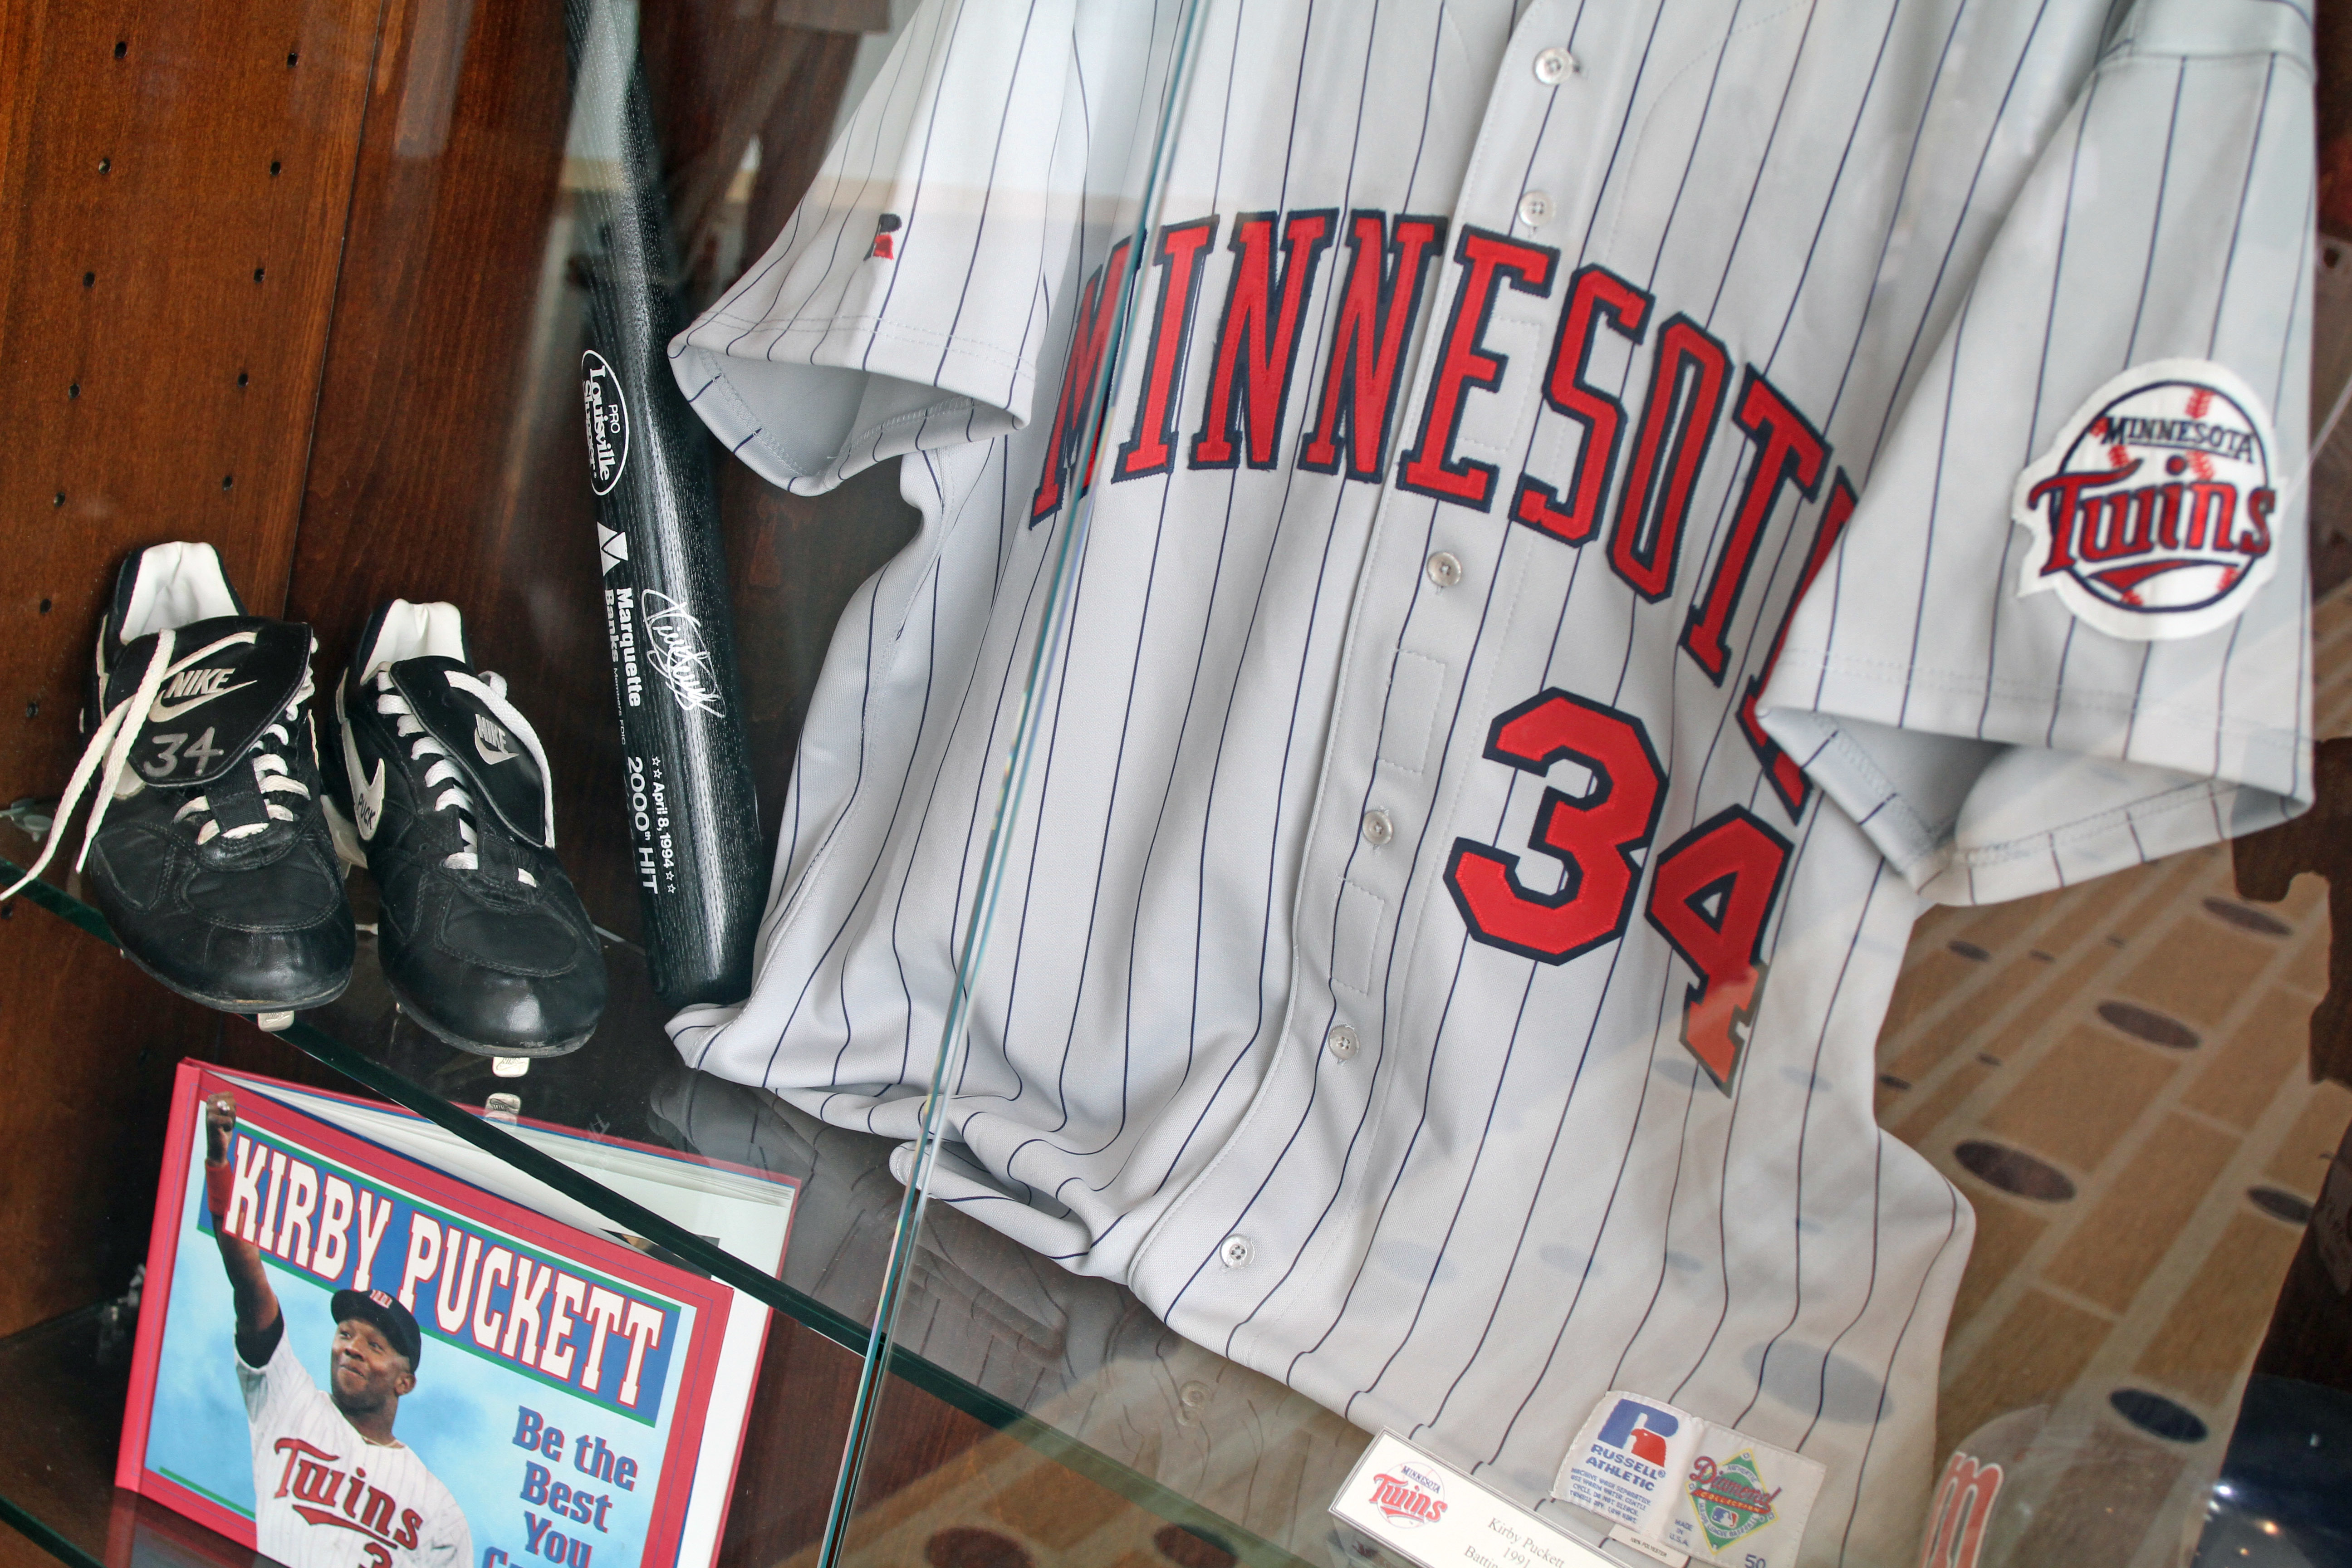 A display of Kirby Puckett items at Target Field.